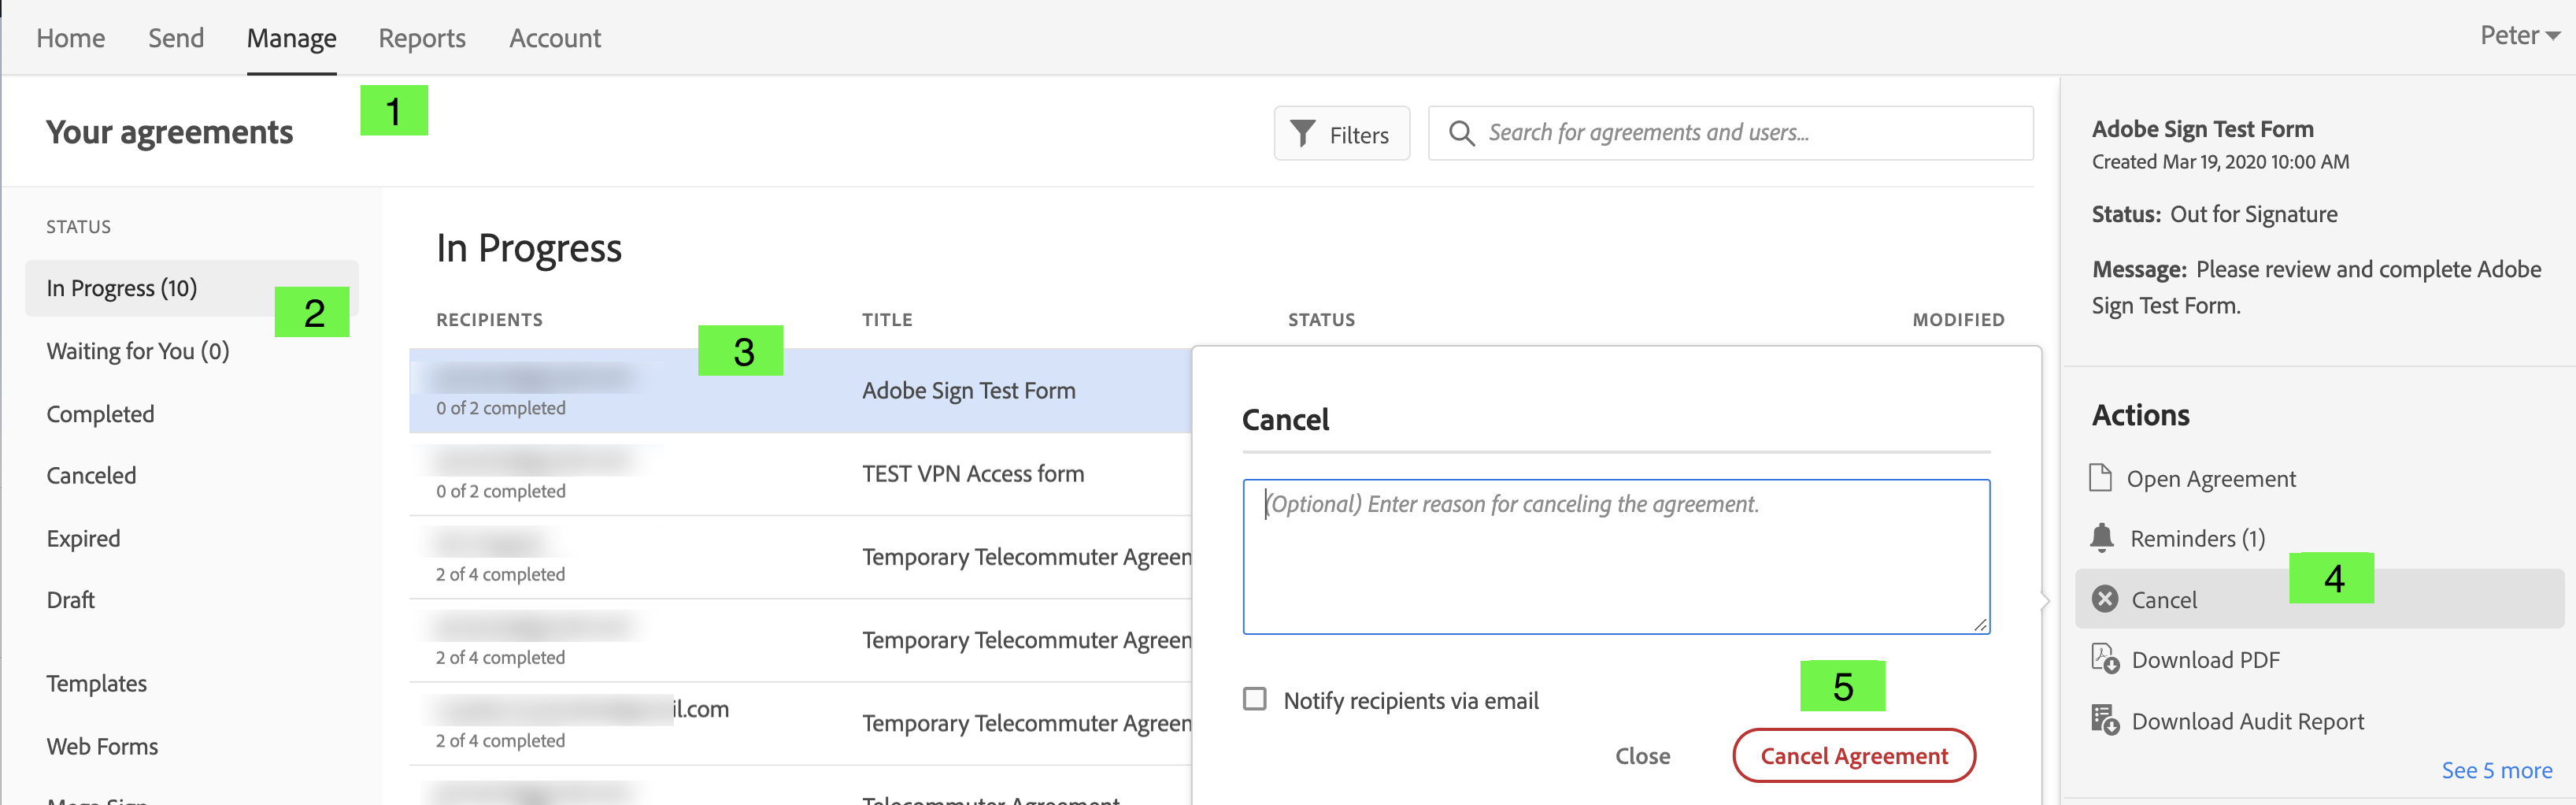 Screenshot of Manage tab, showing steps in agreement cancellation process